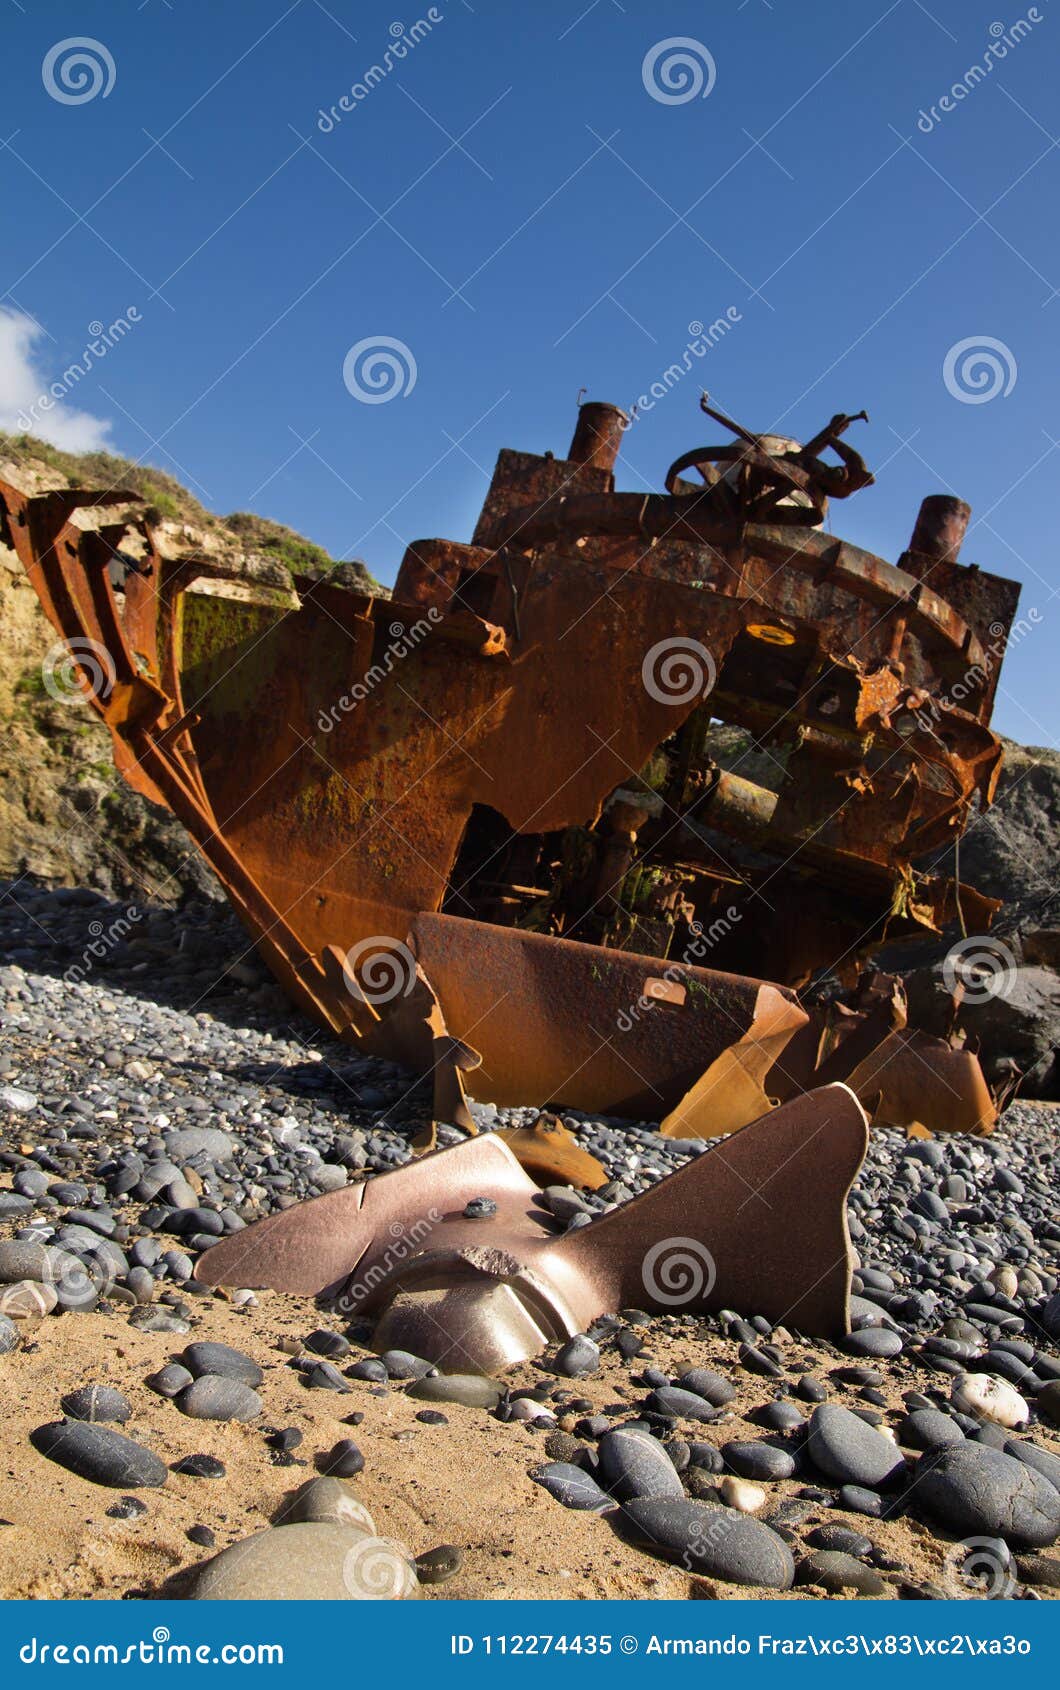 withered and half buried propeller of a wrecked pusher boat